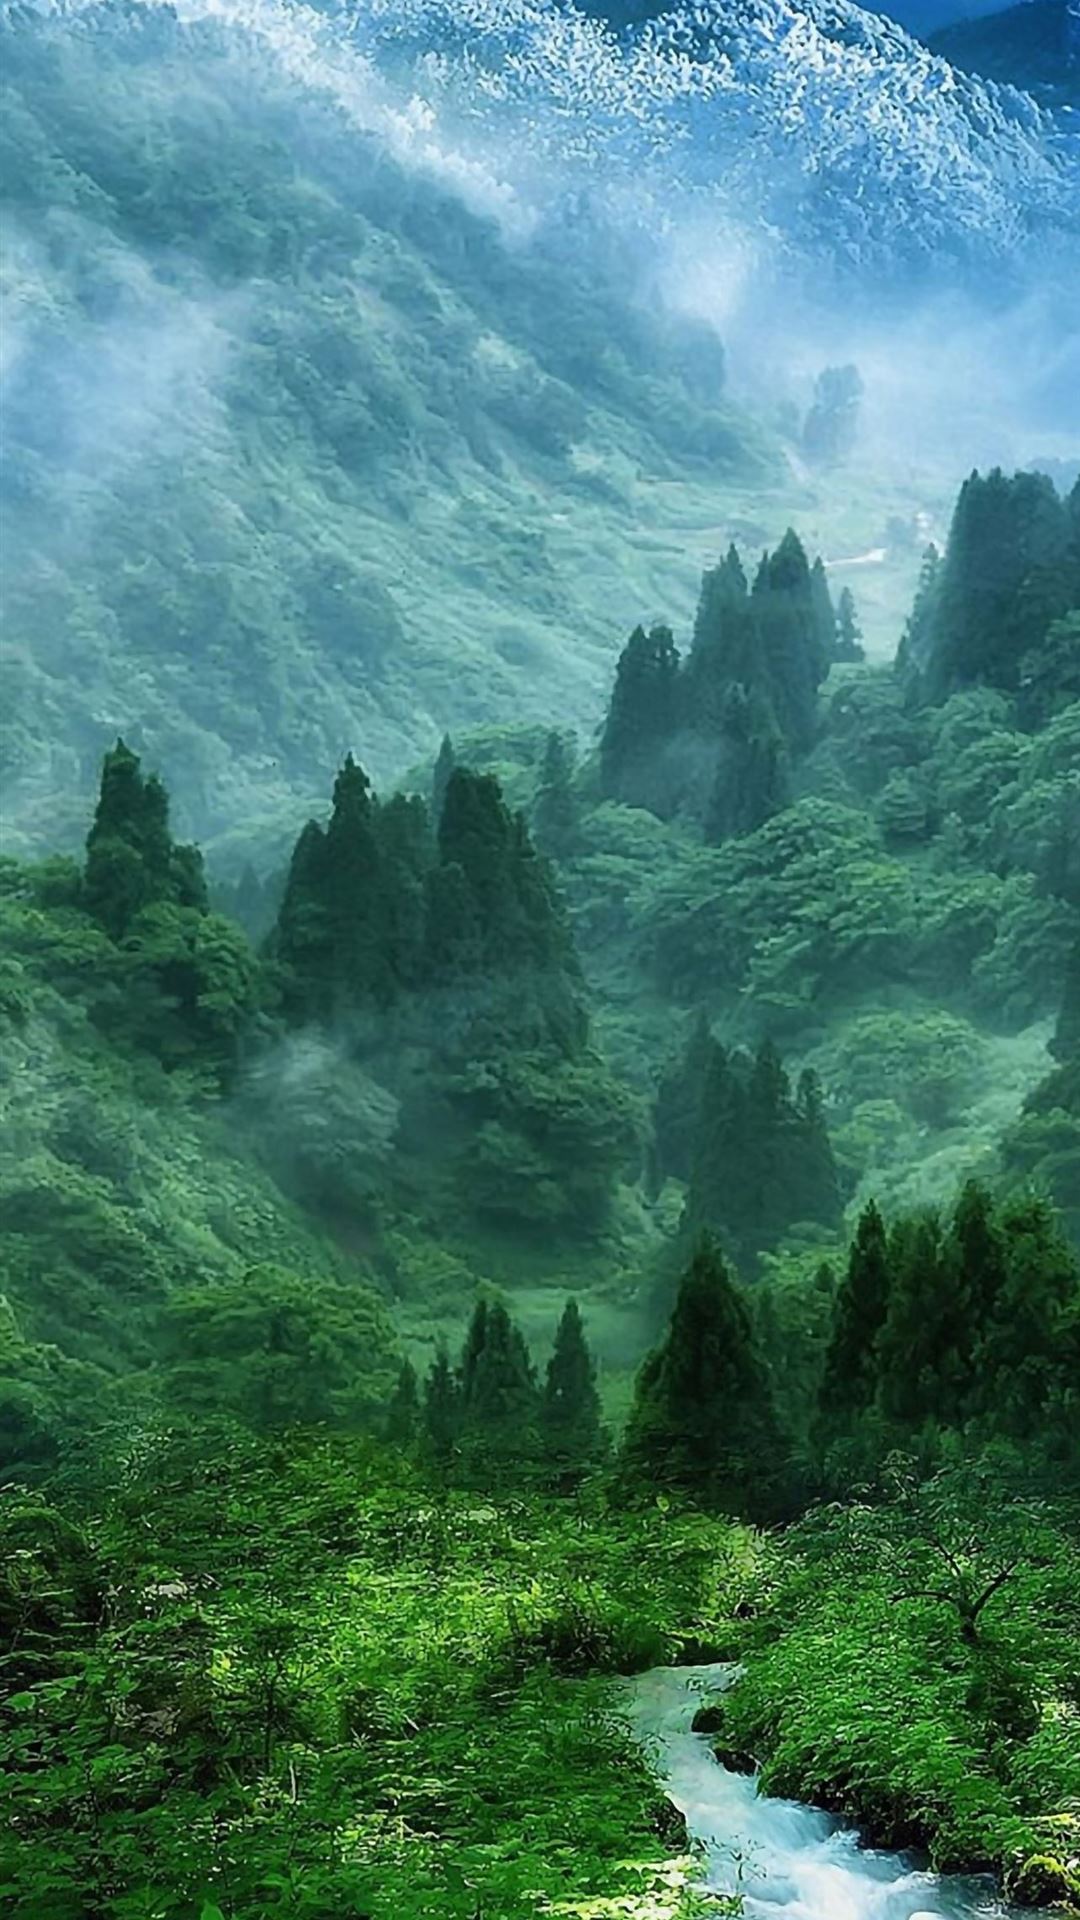 Nature Mist Mountain Wood Forest River Landscape iPhone Wallpaper Free Download